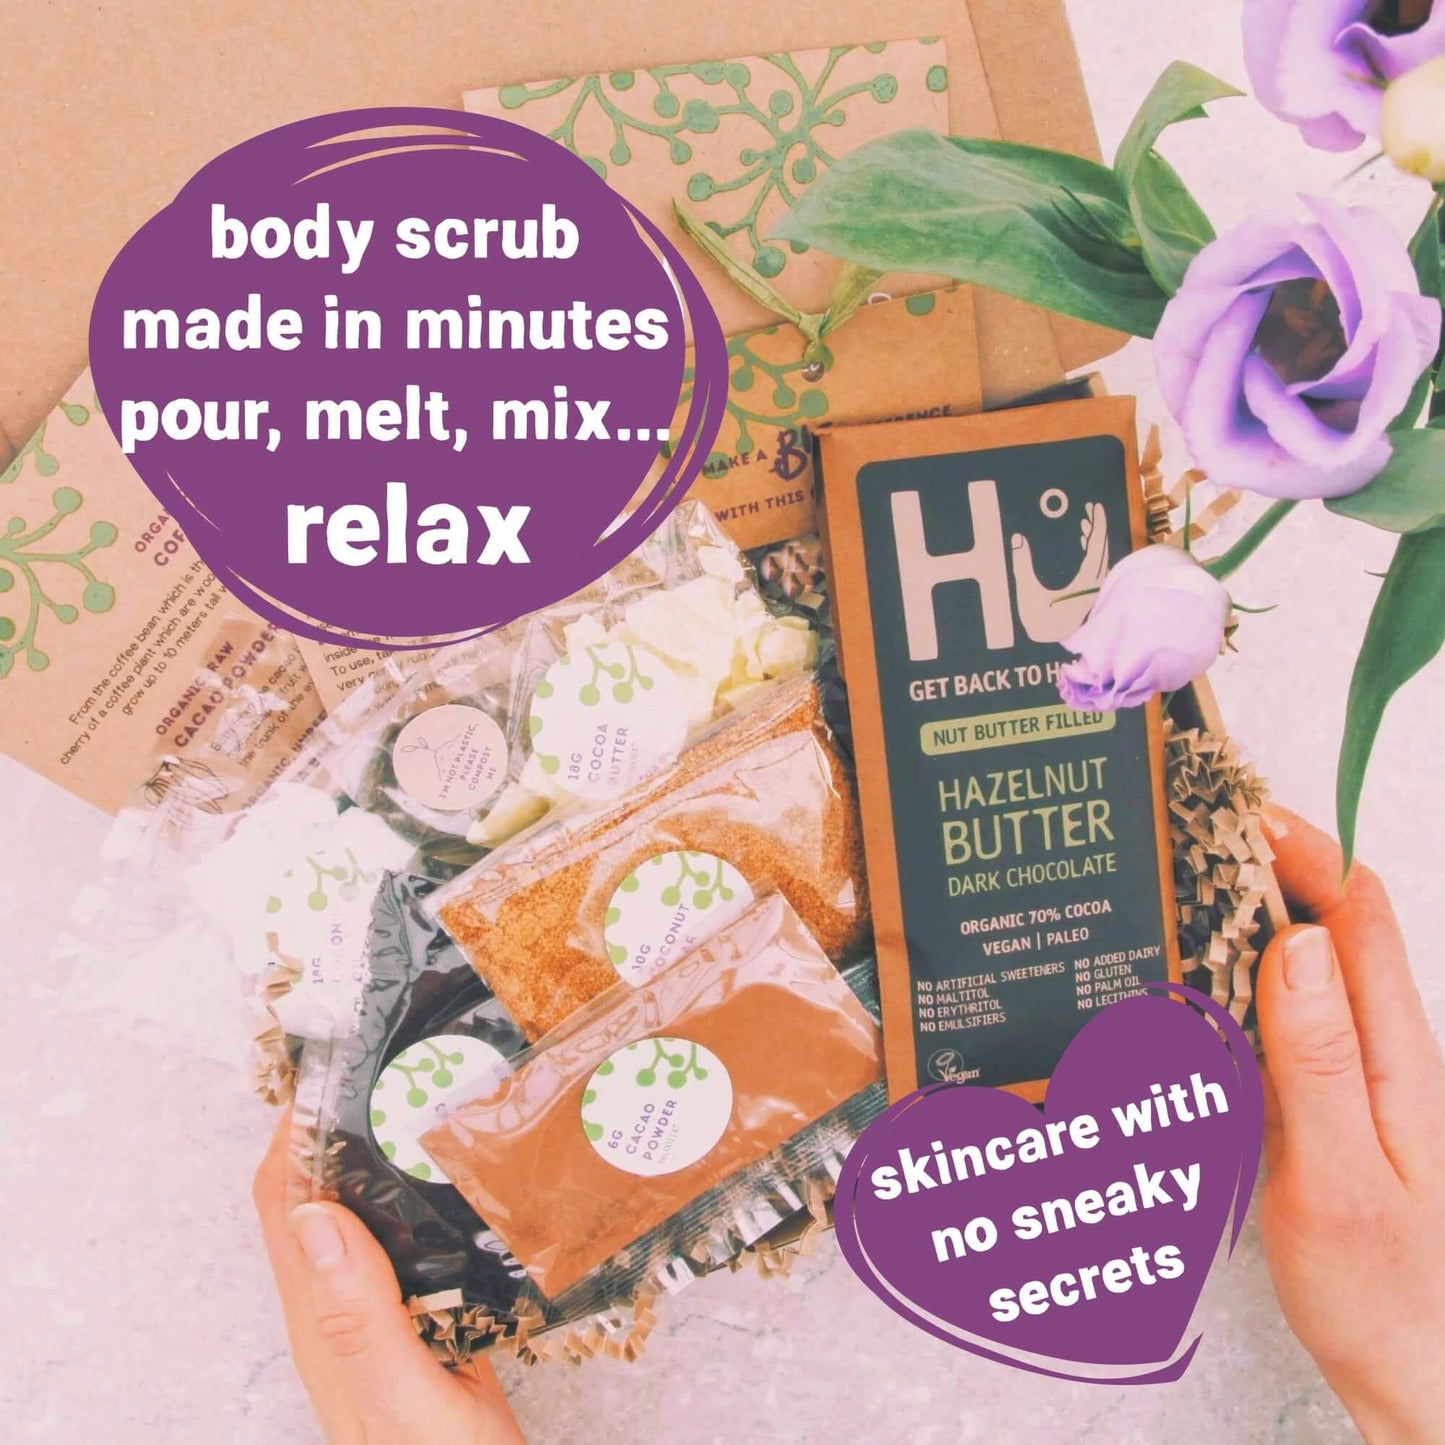 eco-friendly pamper kit inside self care letterbox gift